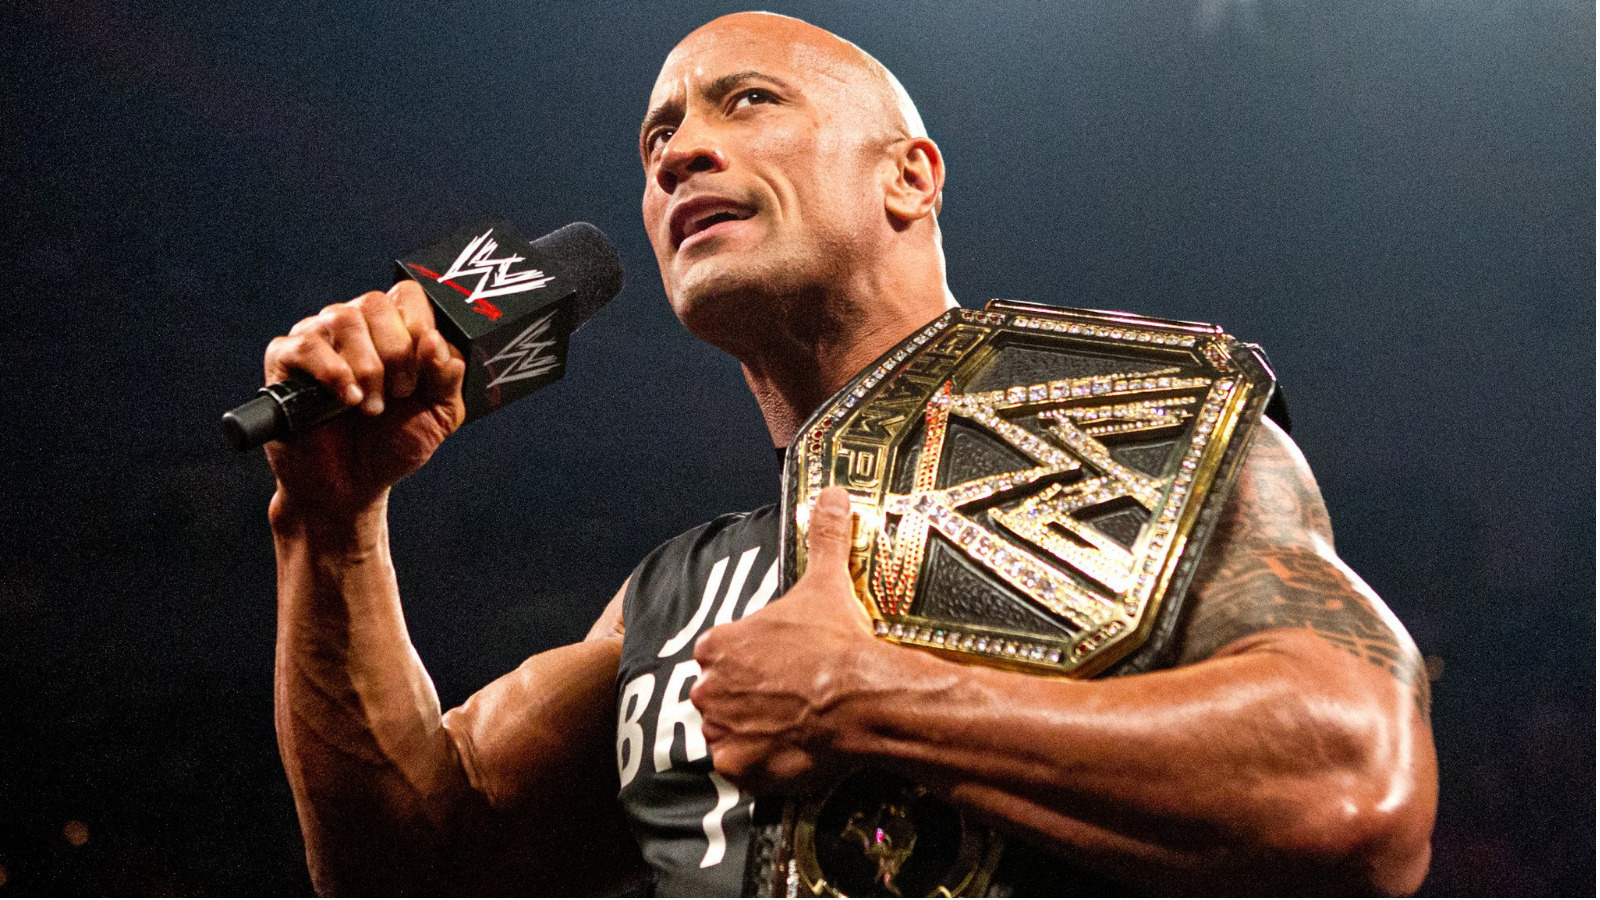 WWE United States Champion Logan Paul Discusses Past Issues With The Rock